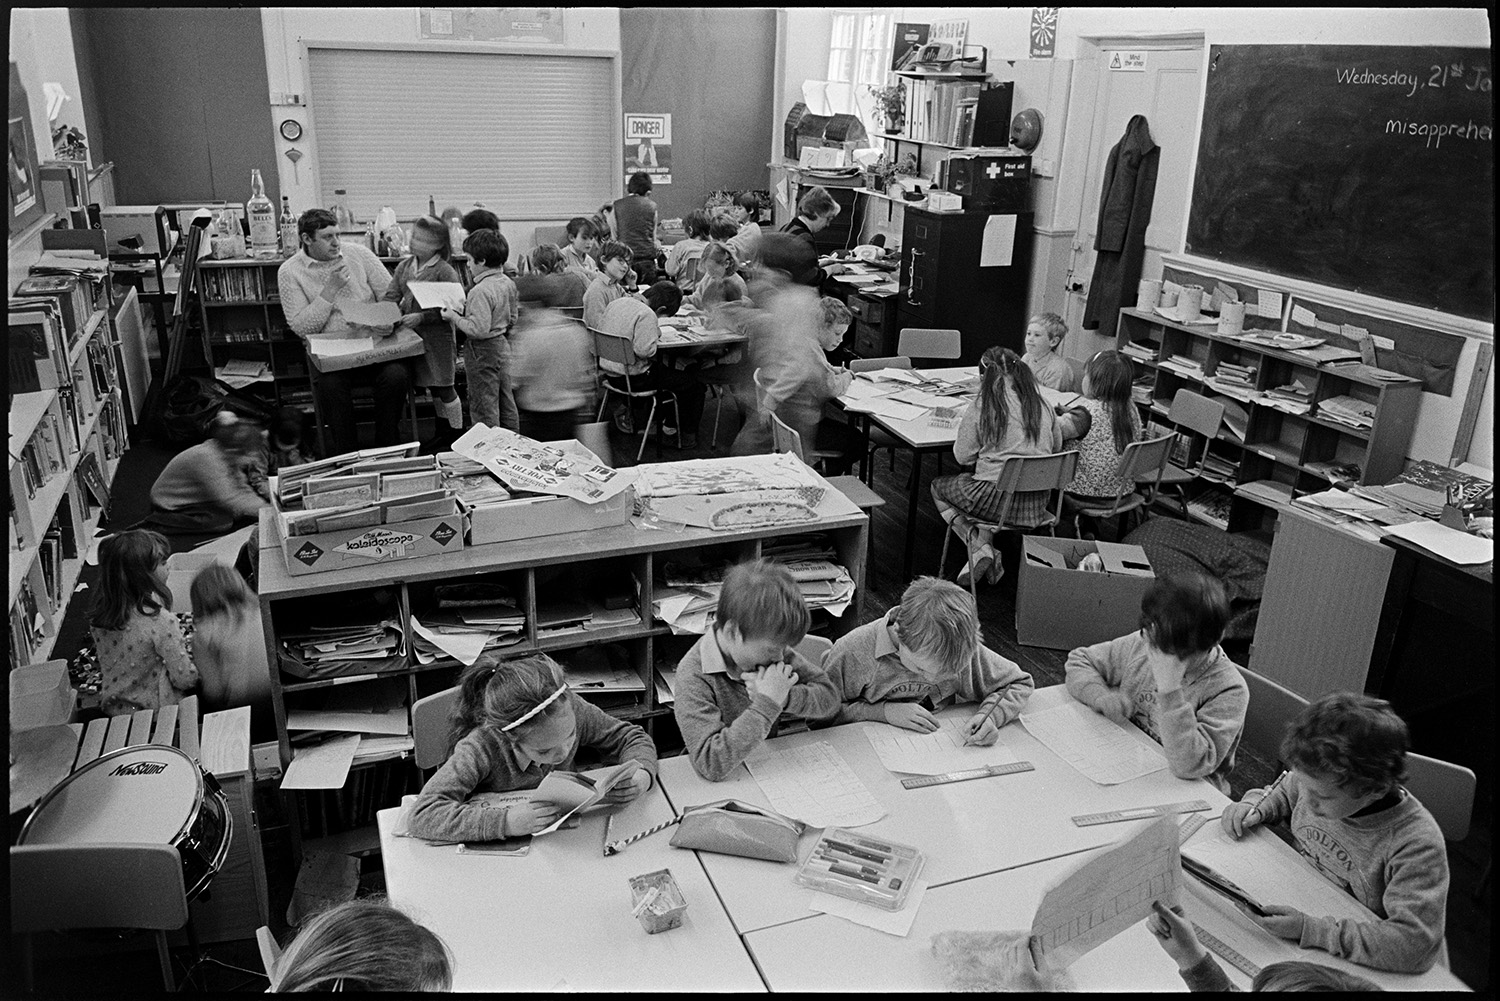 Interior of primary school with children at work, to show crowding to get new building.
[Interior of Dolton Primary School showing a classroom with children and teachers working at tables surrounded by bookshelves. The image was taken to demonstrate overcrowding in the school.]